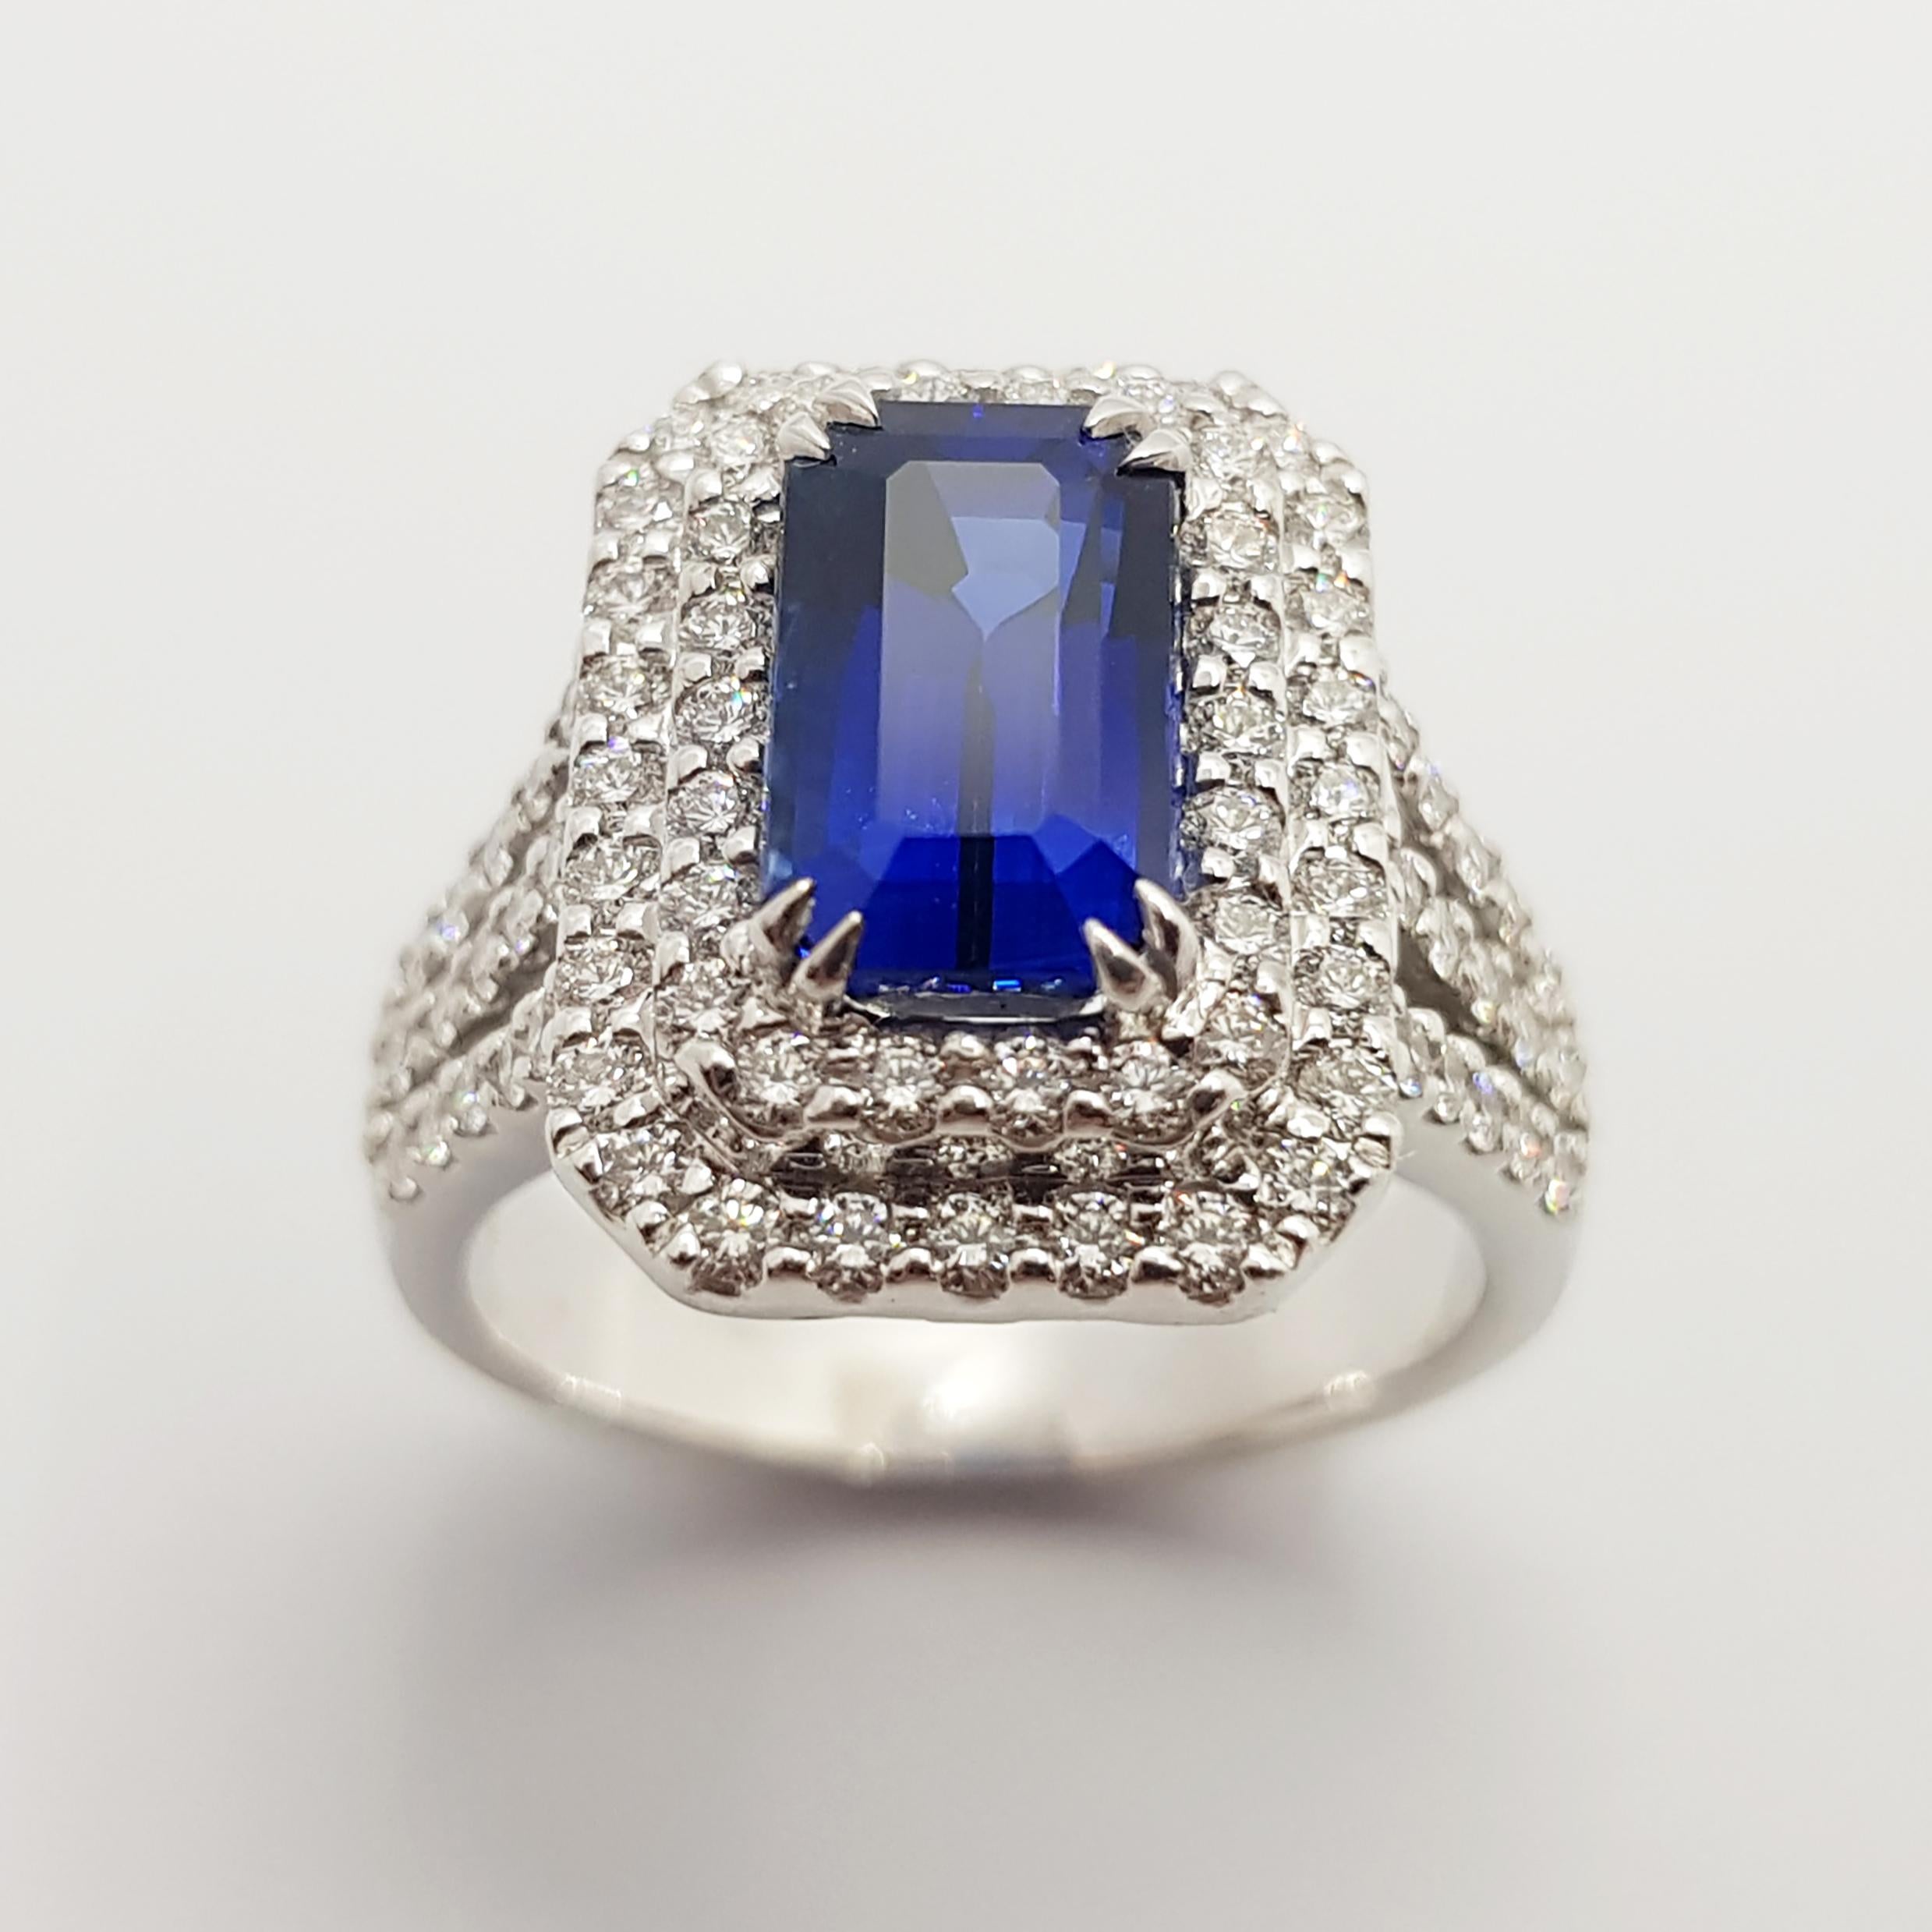 GIA Certified 3 Cts Blue Sapphire with Diamond Ring Set in 18 Karat White Gold For Sale 2